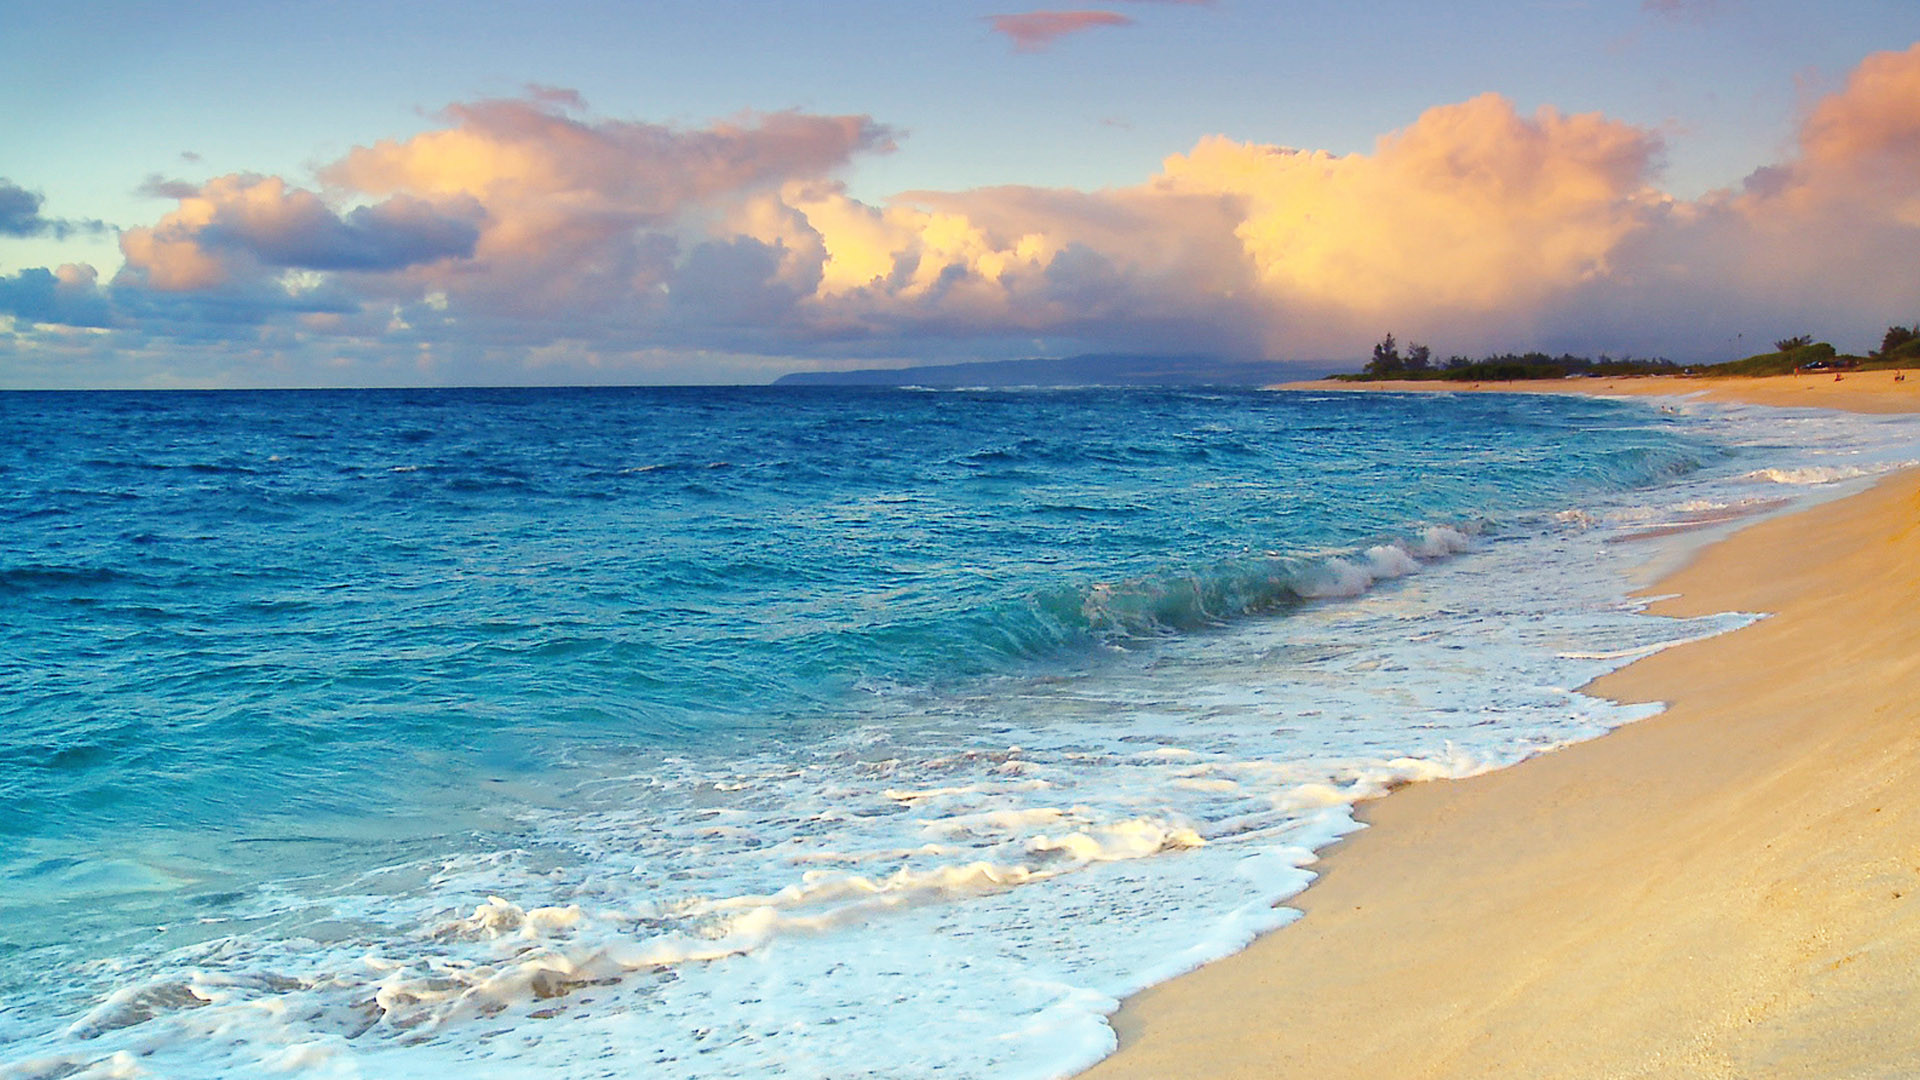 1920x1080 SEE The Most Beautiful Hawaii Beaches Photos from our new HD Video DVD &  Blu Ray: The Nature DVD Video Series for Relaxation with spectacular ocean  waves, ...